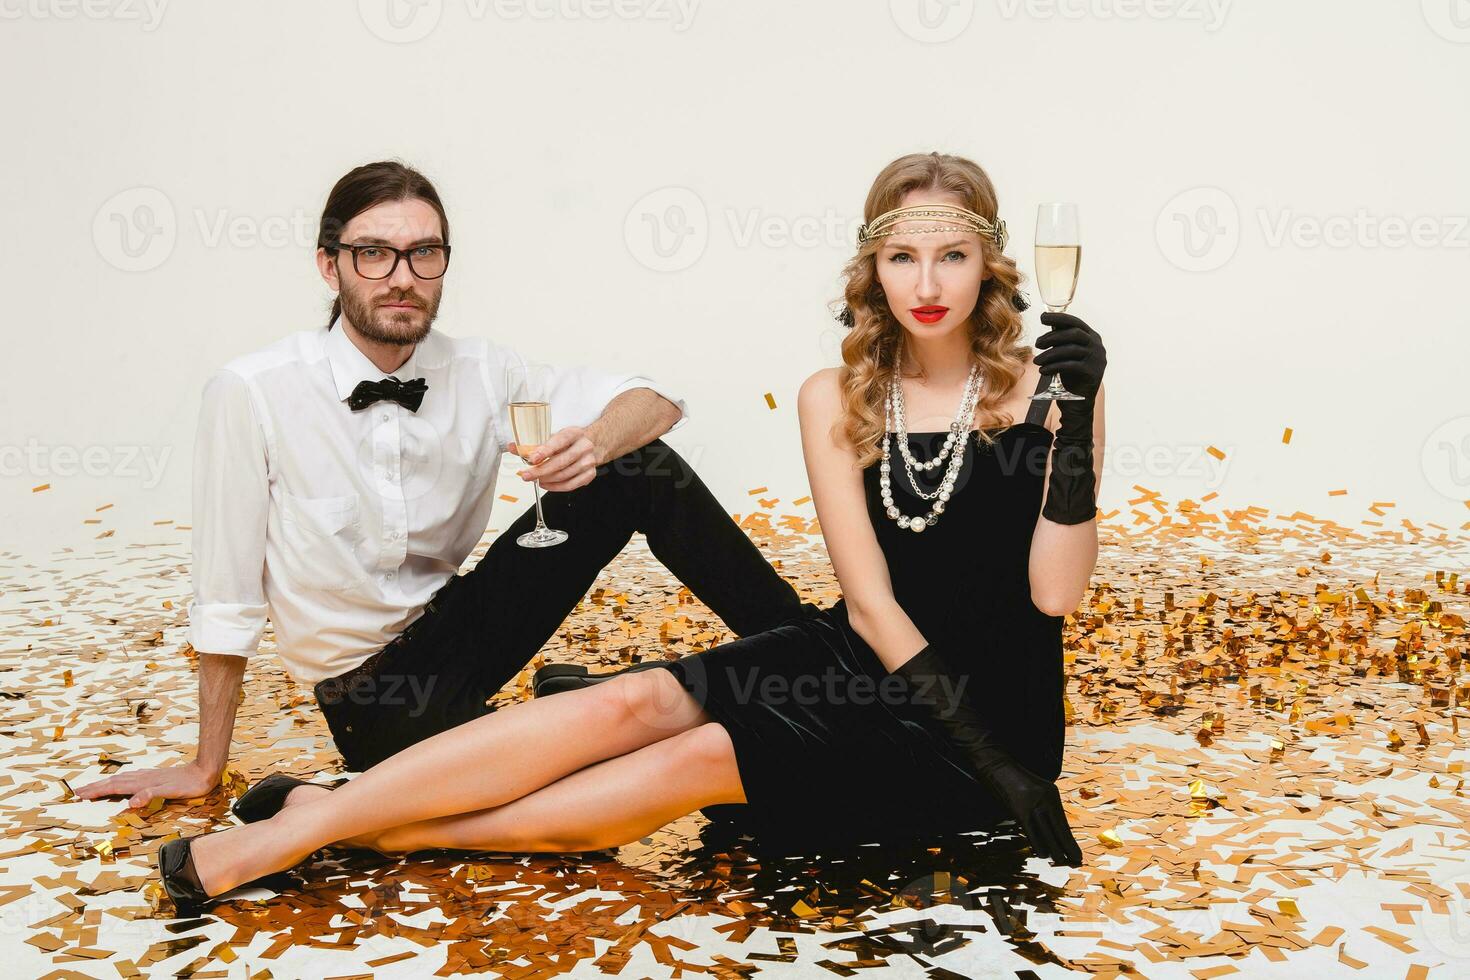 young stylish couple in love celebrating new year photo